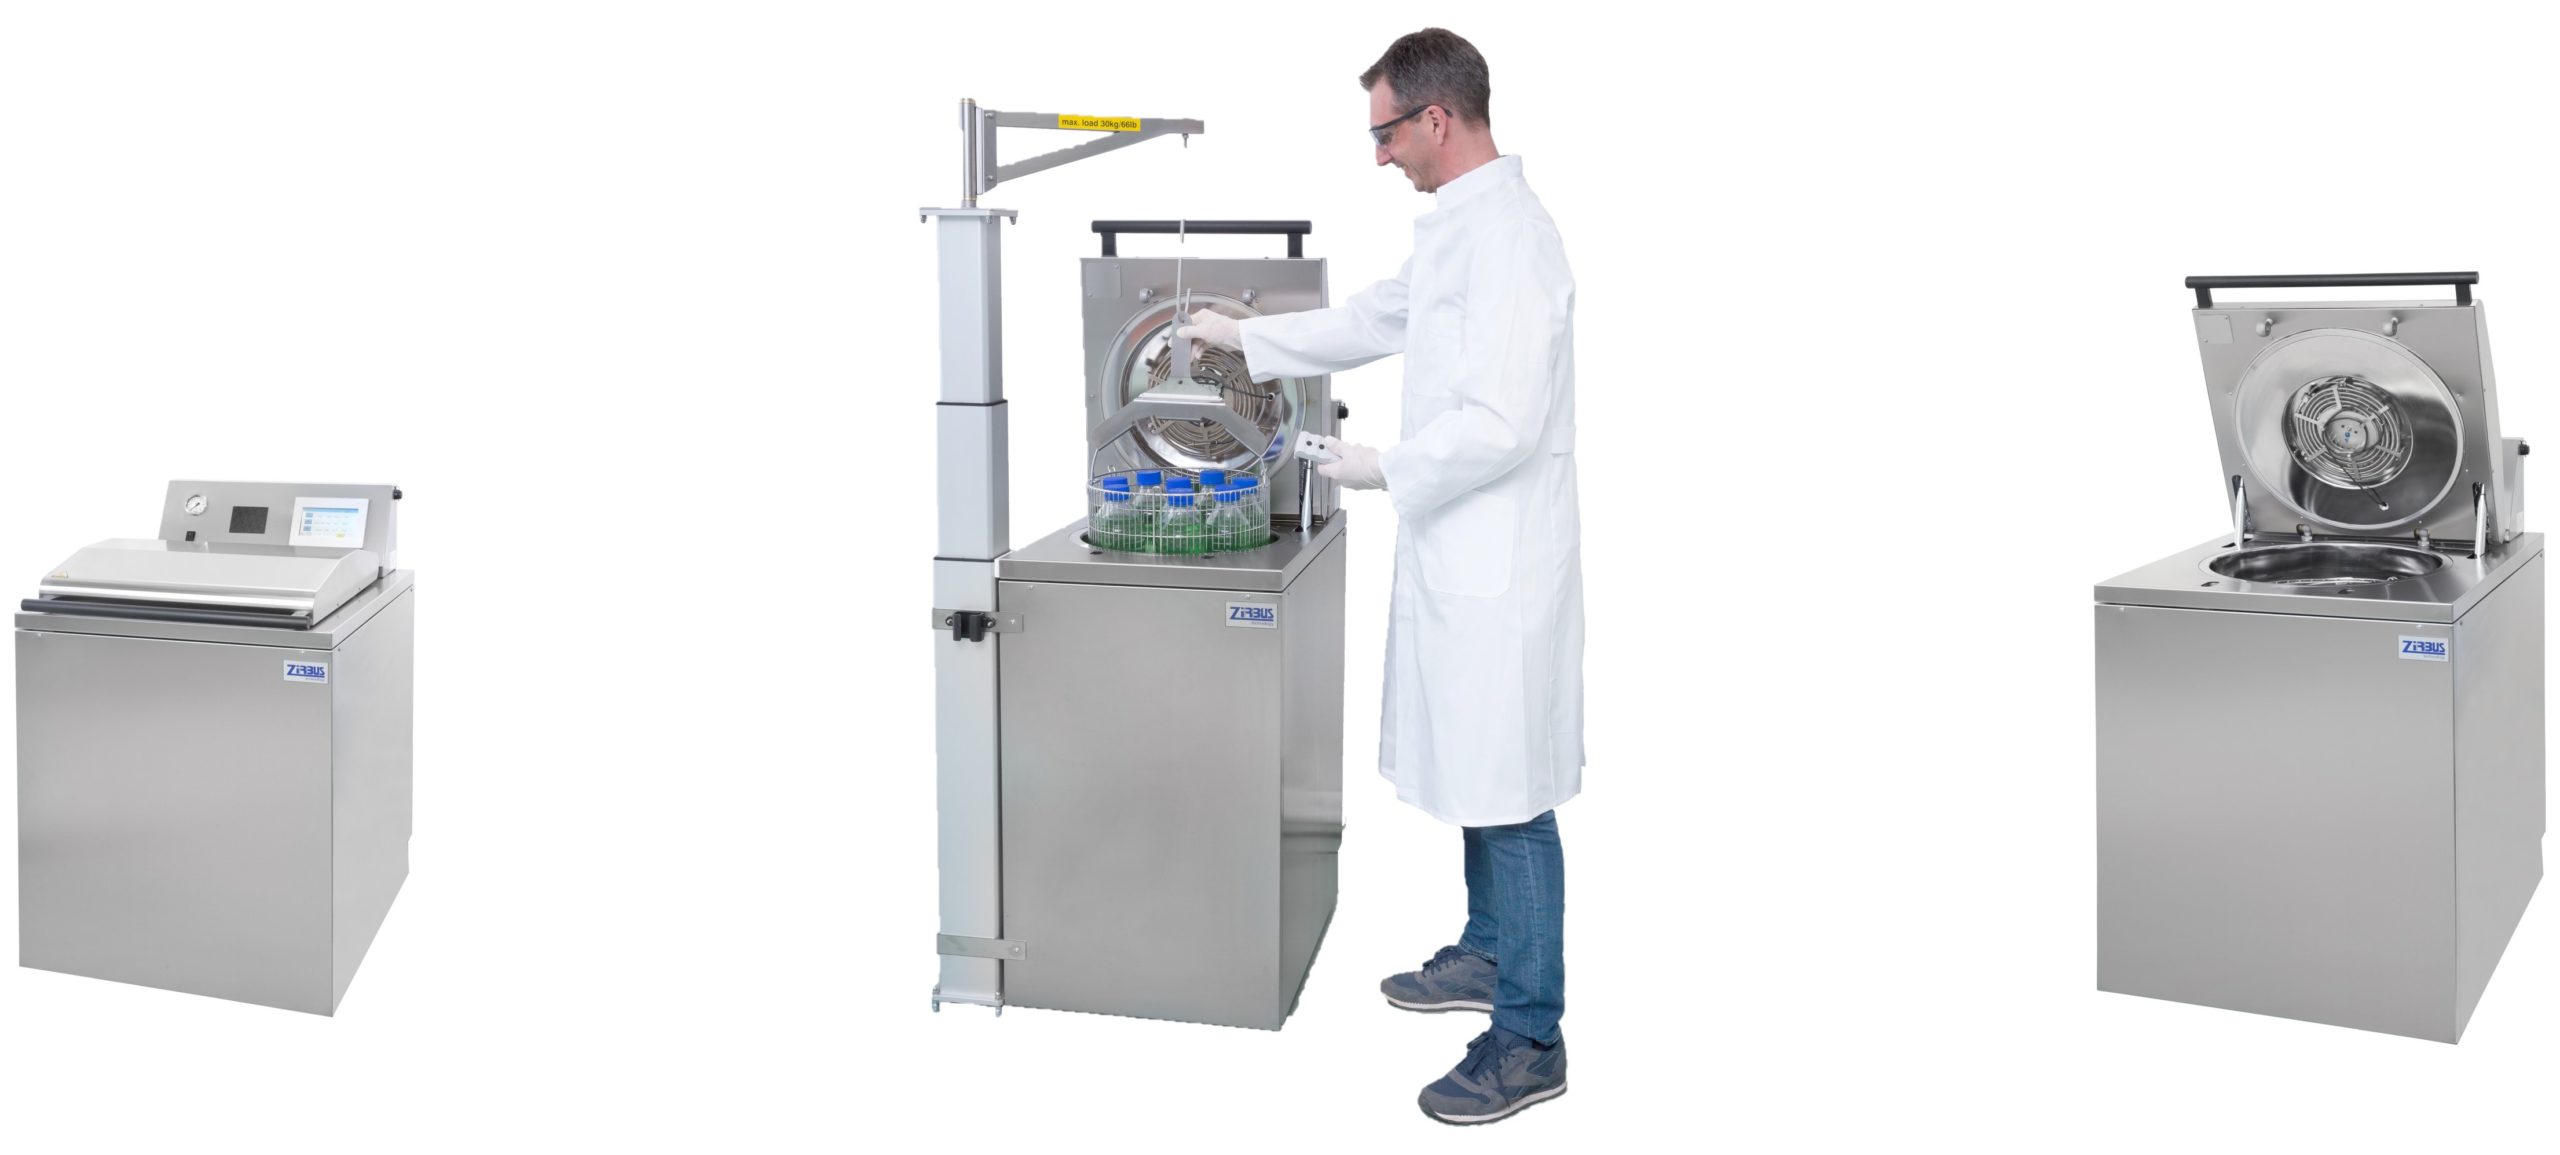 Why To Autoclave Liquids With a Load Probe